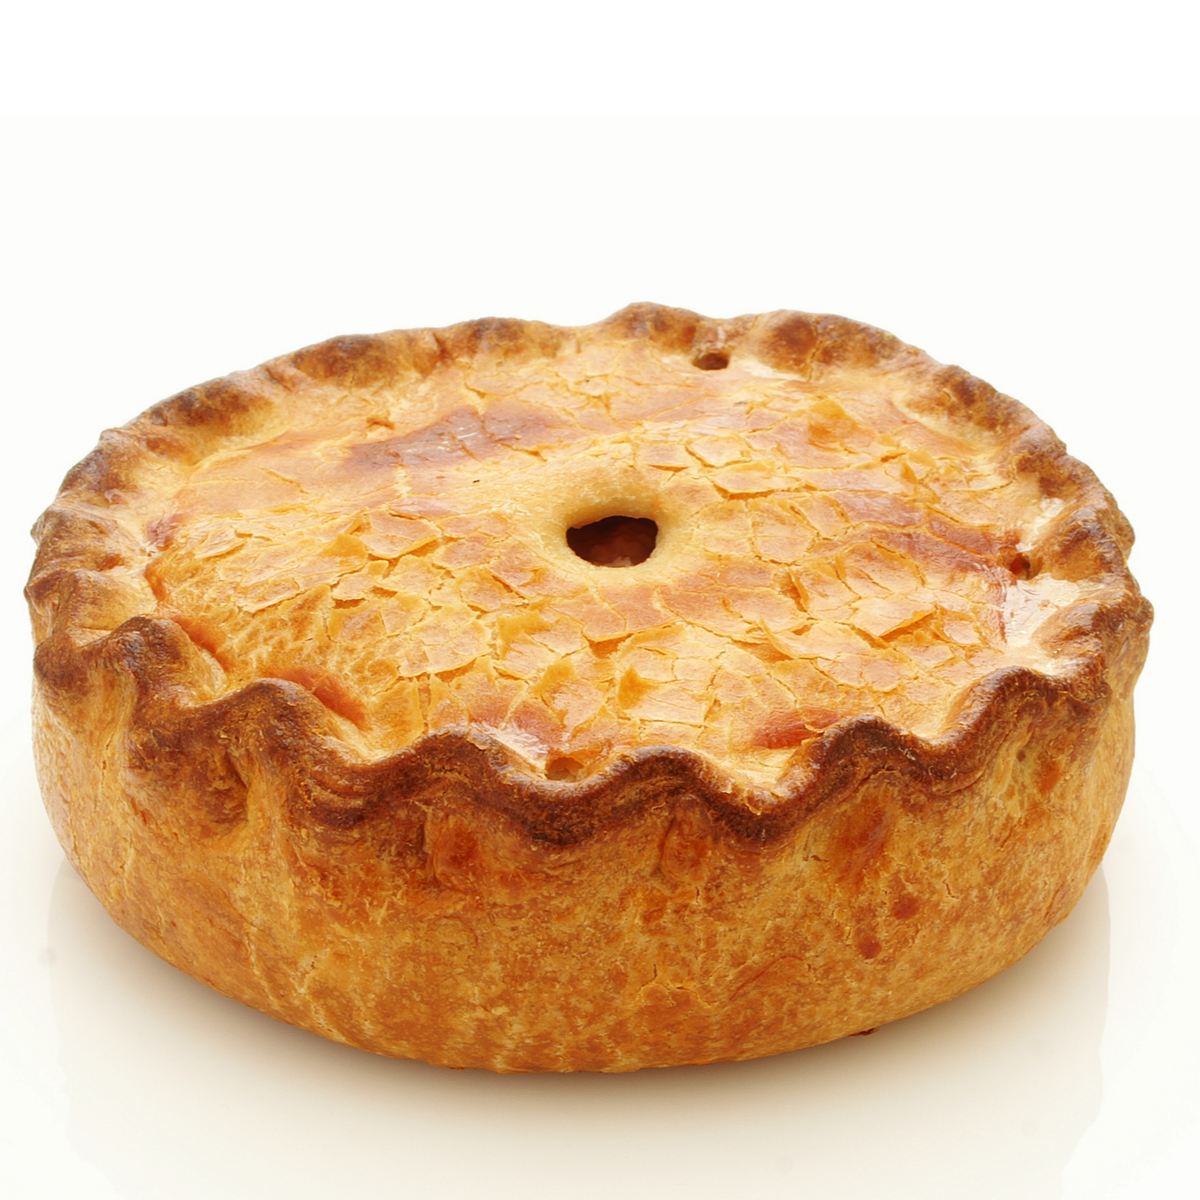 Simply Good Pies Cheese Burger Pie, Best handmade pies in Singapore, Best pies in Singapore, Best chicken burger pie in Singapore, Best pies delivery sg